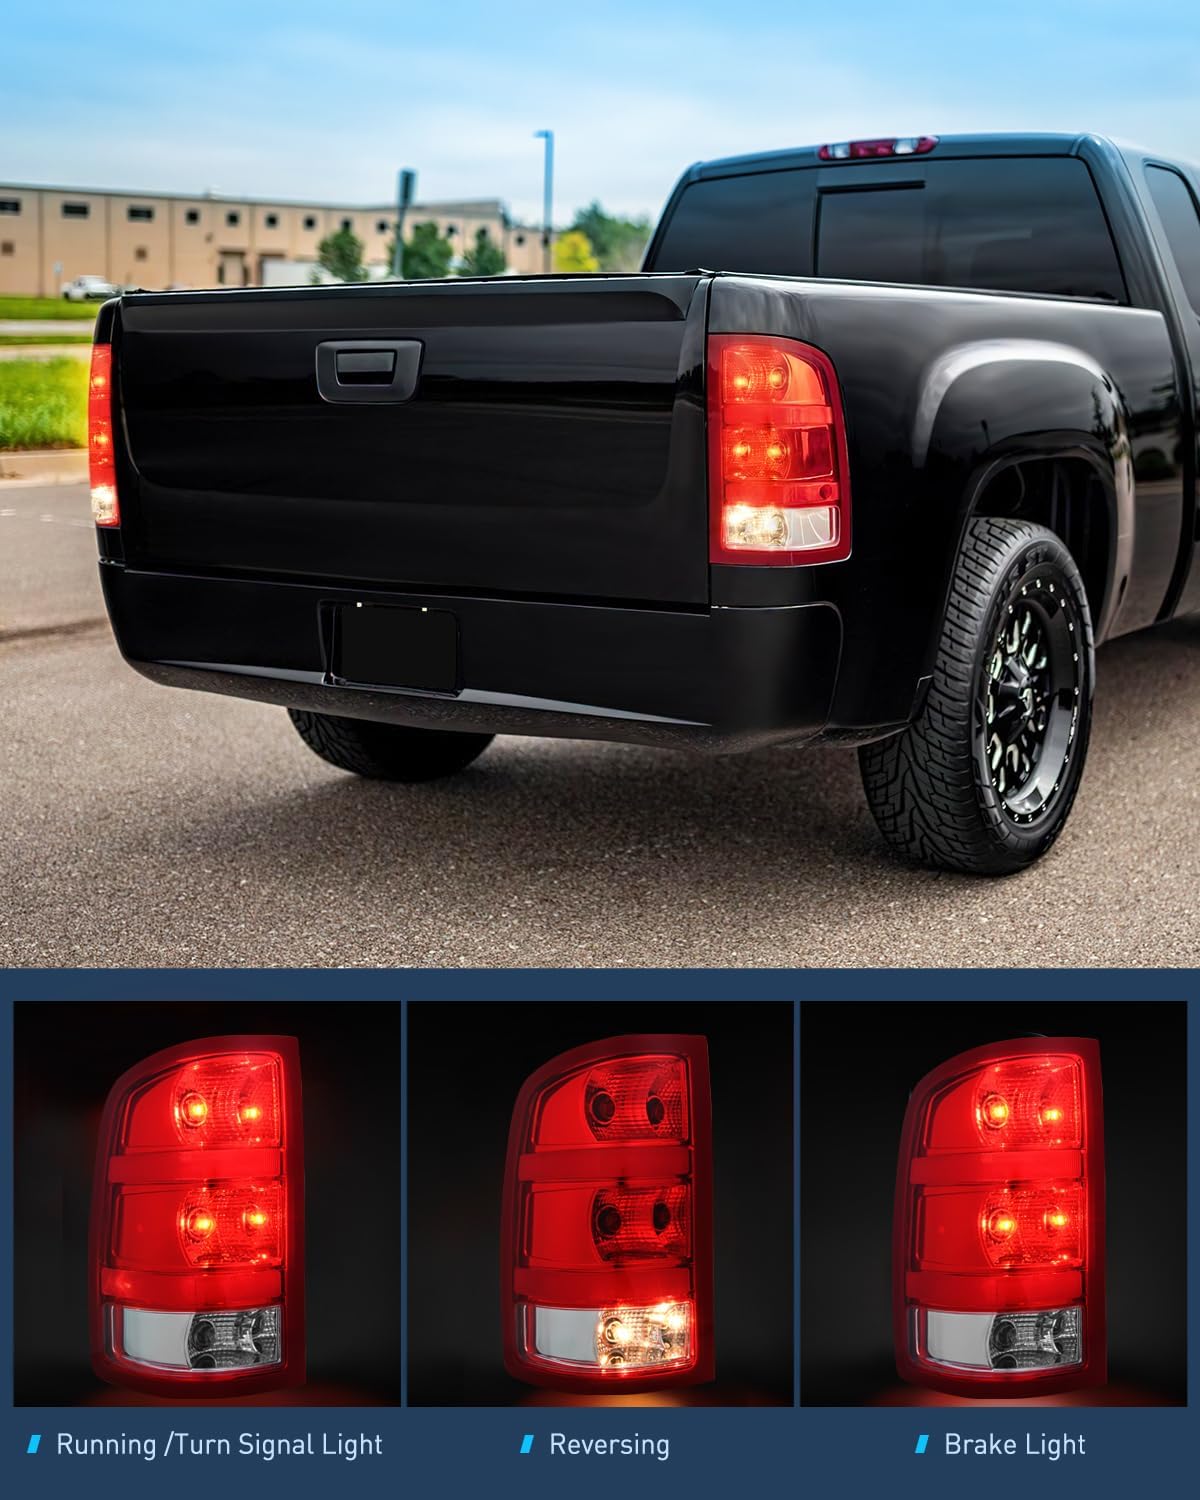 2007-2013 GMC Sierra 1500 2500HD 3500HD Taillight Assembly Rear Lamp Replacement OE Style Driver Passenger Side Nilight